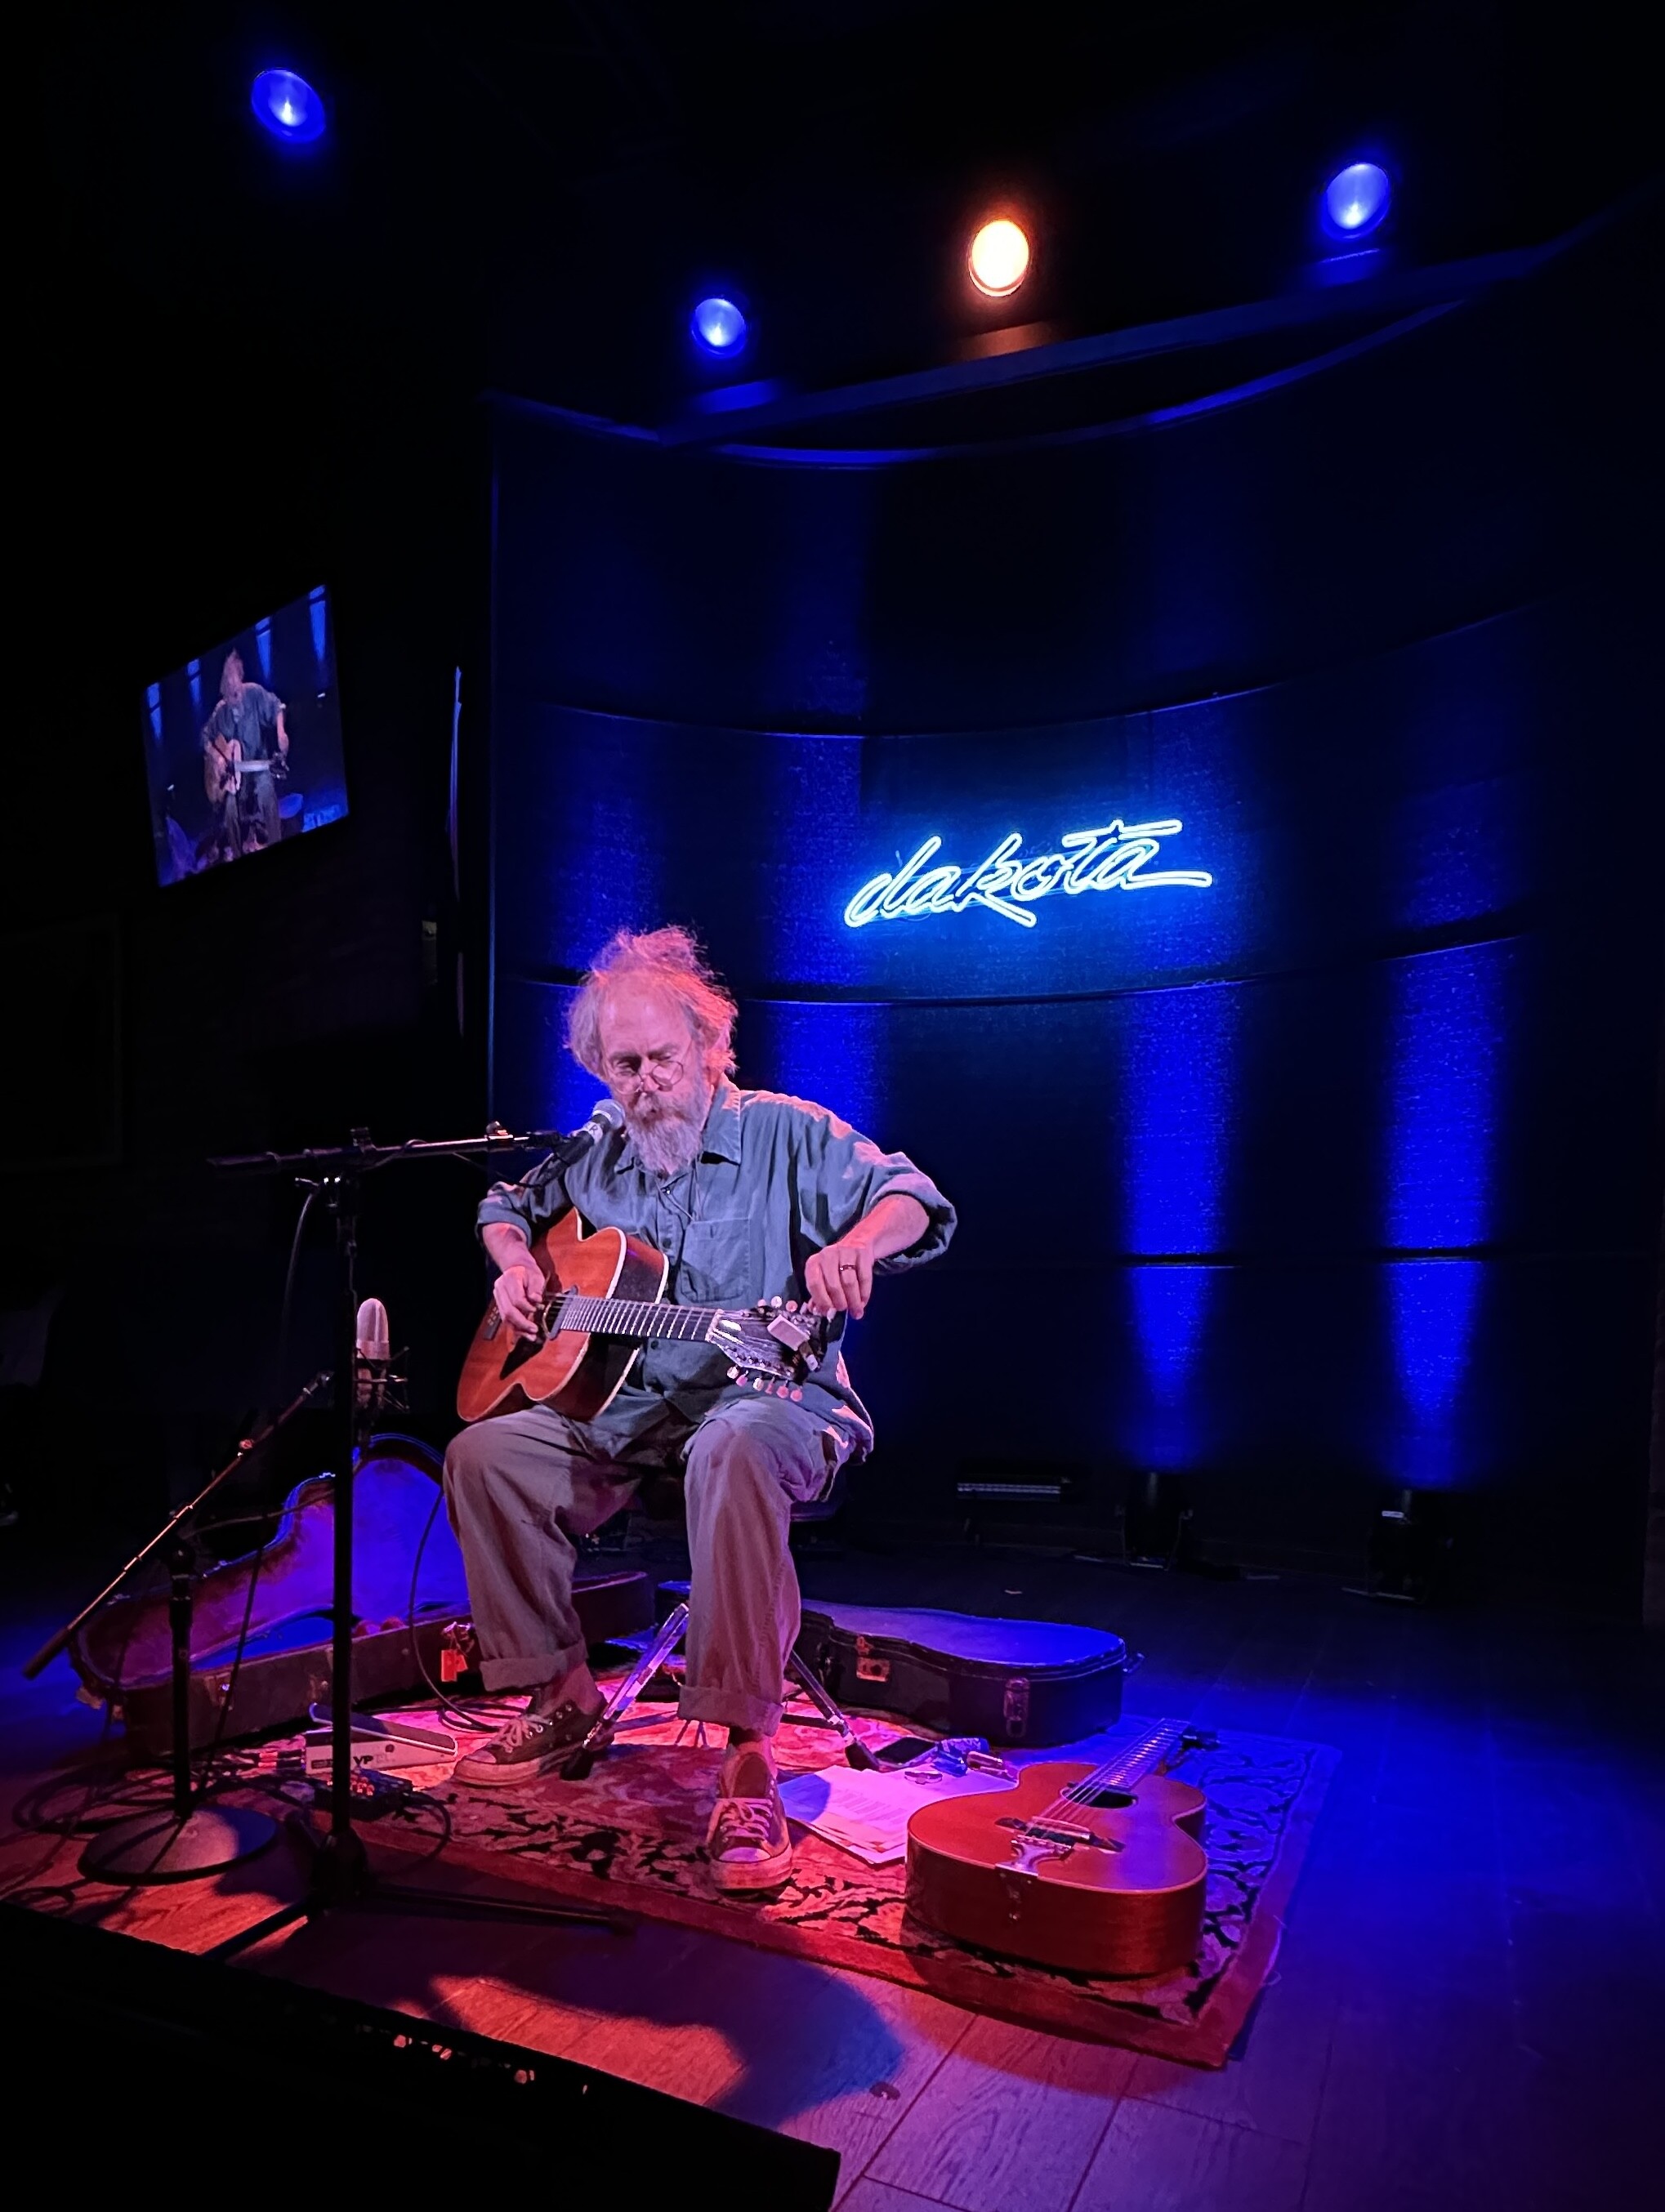 Charlie Parr sitting on stage in red and blue spotlights holding a guitar with a blue neon “dakota” sign behind him